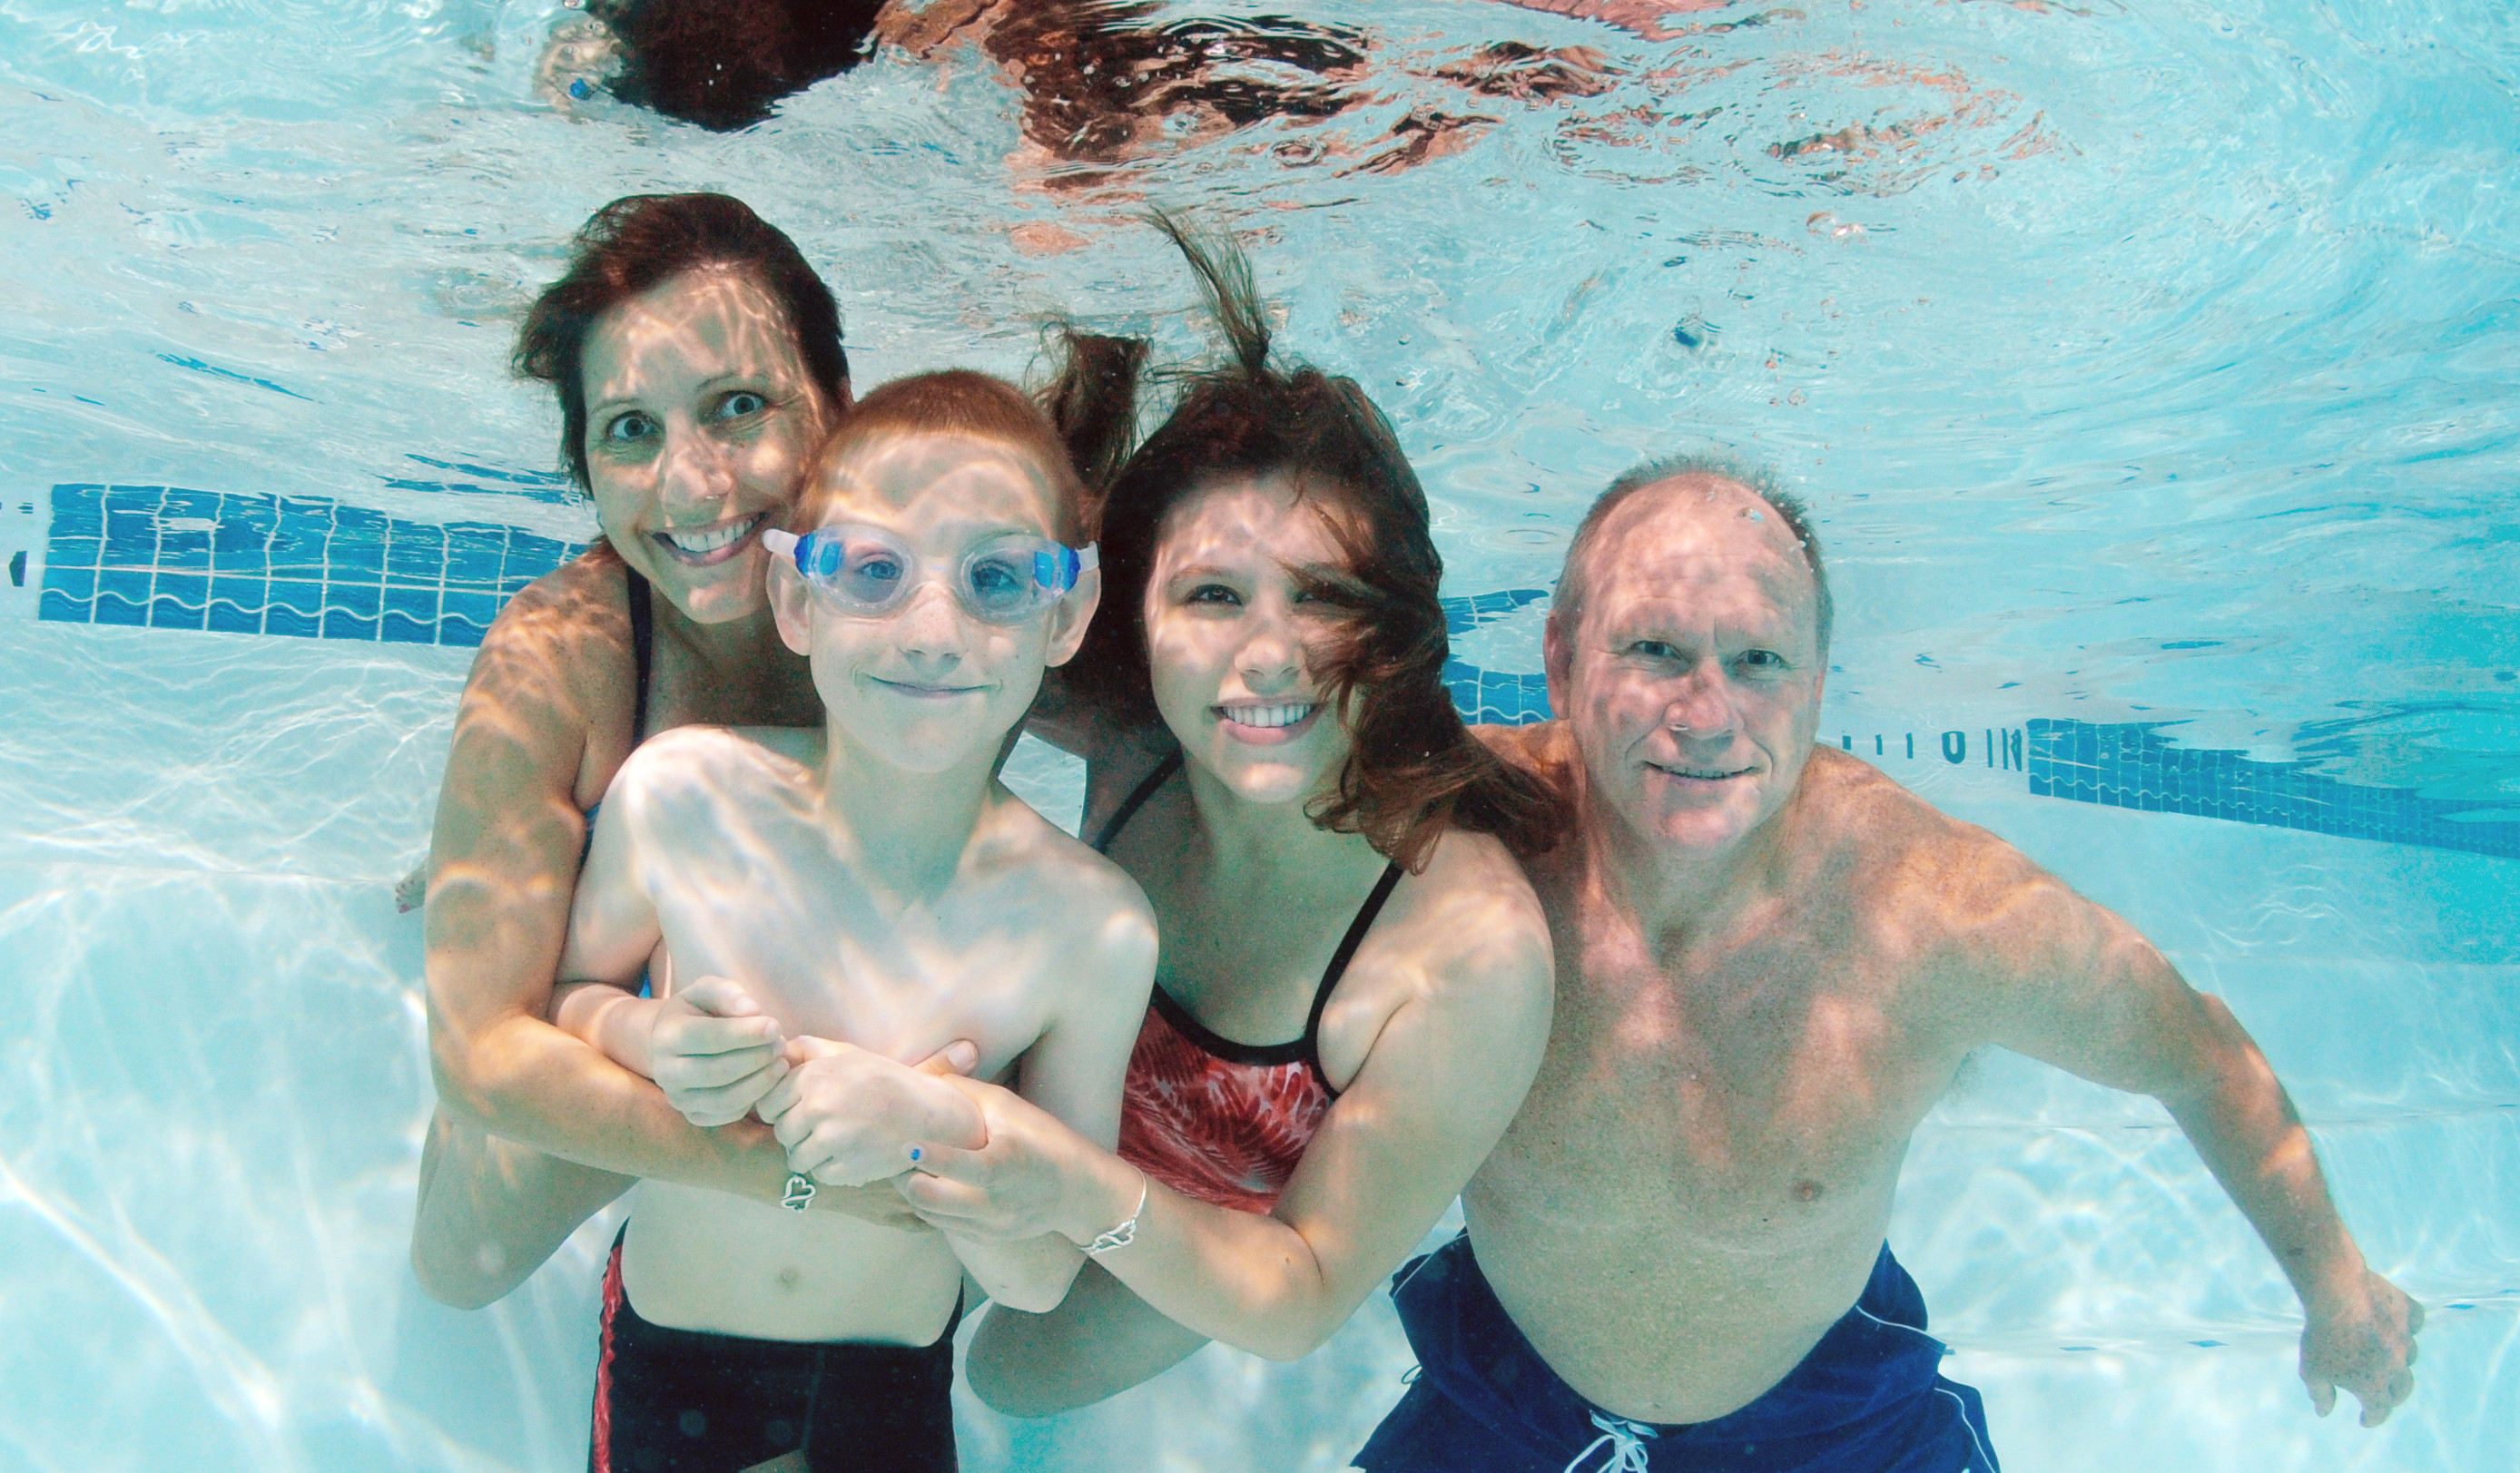 Fitness, Safety and Family Fun in the Water